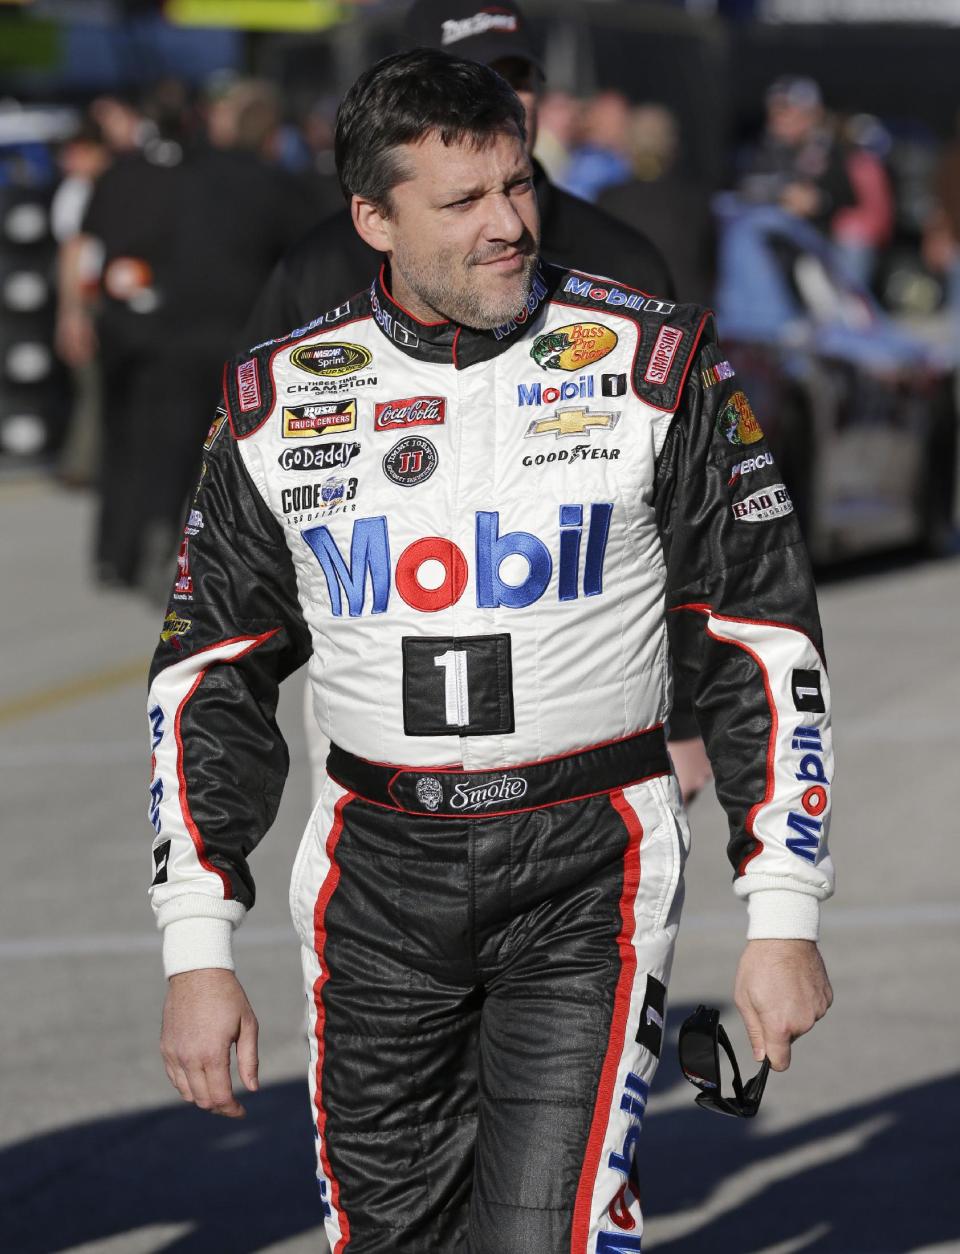 Tony Stewart walks to his garage before practice for the Sprint Unlimited auto race at Daytona International Speedway in Daytona Beach, Fla., Friday, Feb. 14, 2014. Stewart has not raced in more than six months since he broke two bones in his leg in an August sprint-car crash.(AP Photo/John Raoux)